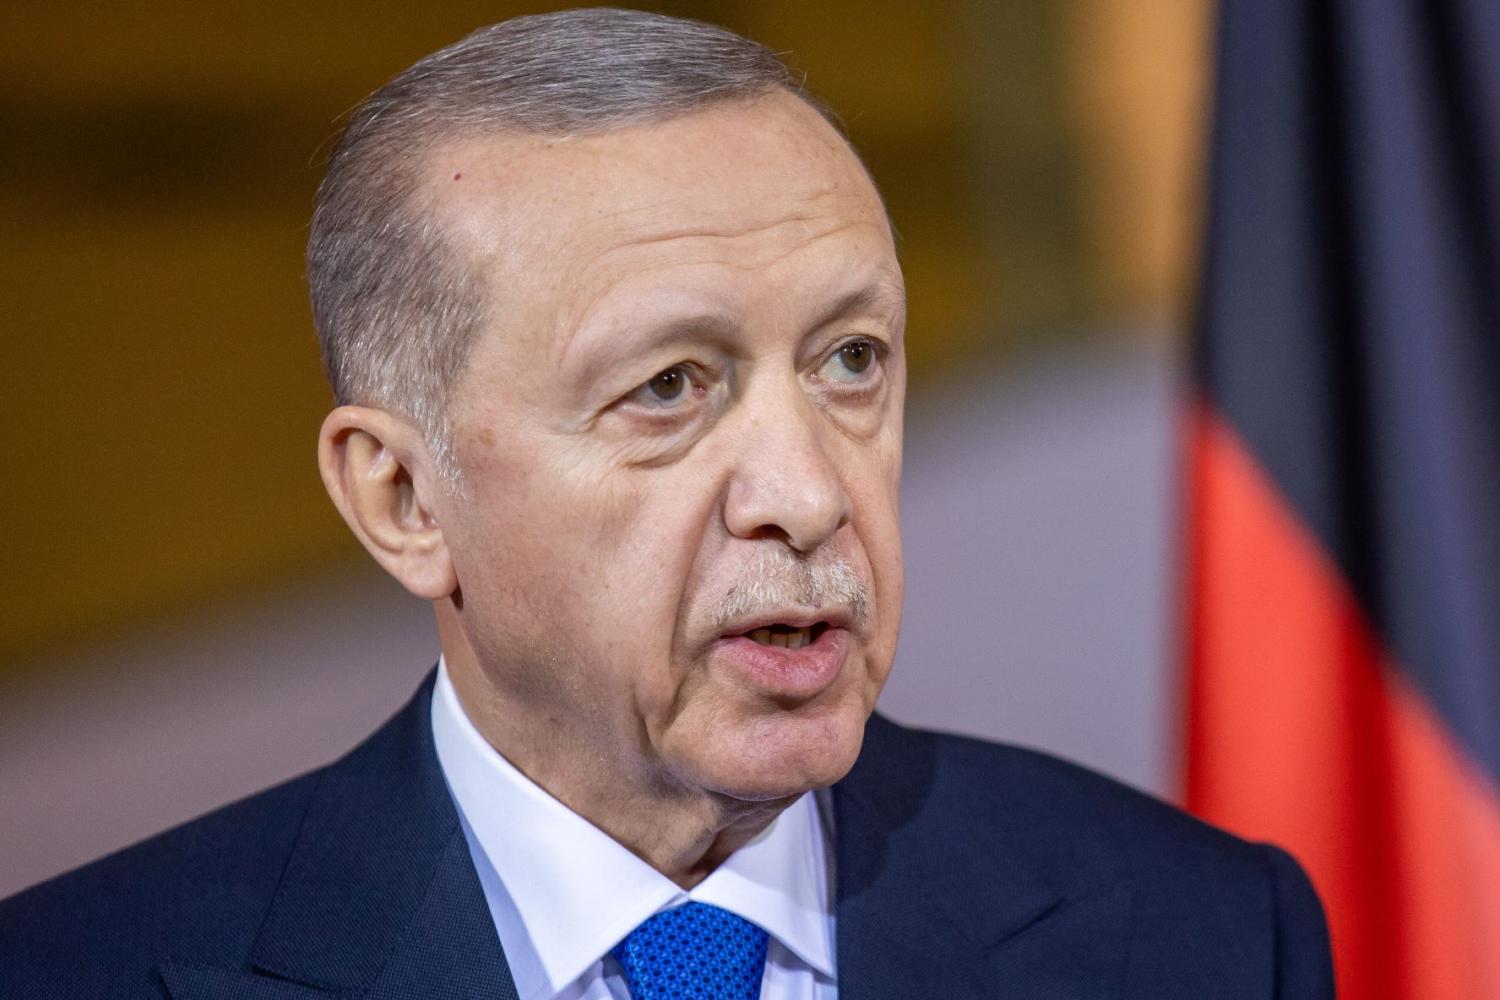 The president of the Republic of Turkey, Recep Tayyip Erdoğan, speaks at a press conference in Berlin on November 17, 2023.